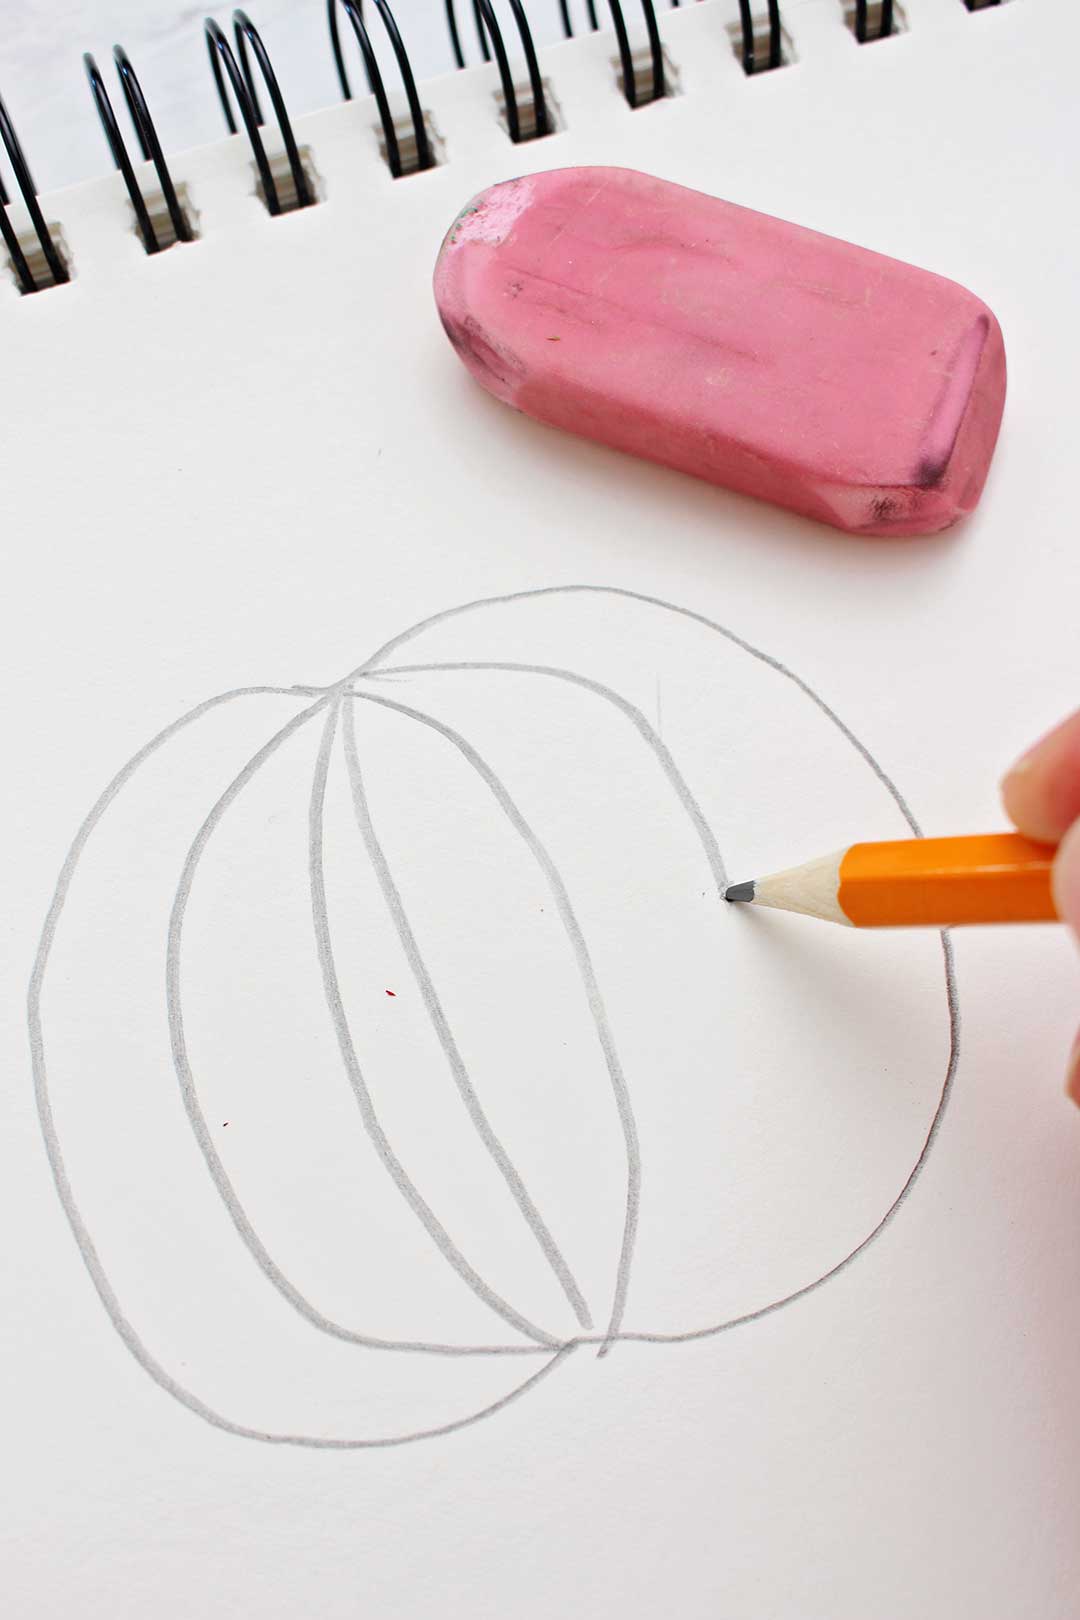 Pencil drawing of the first steps of a pumpkin sketch with pink eraser near by.